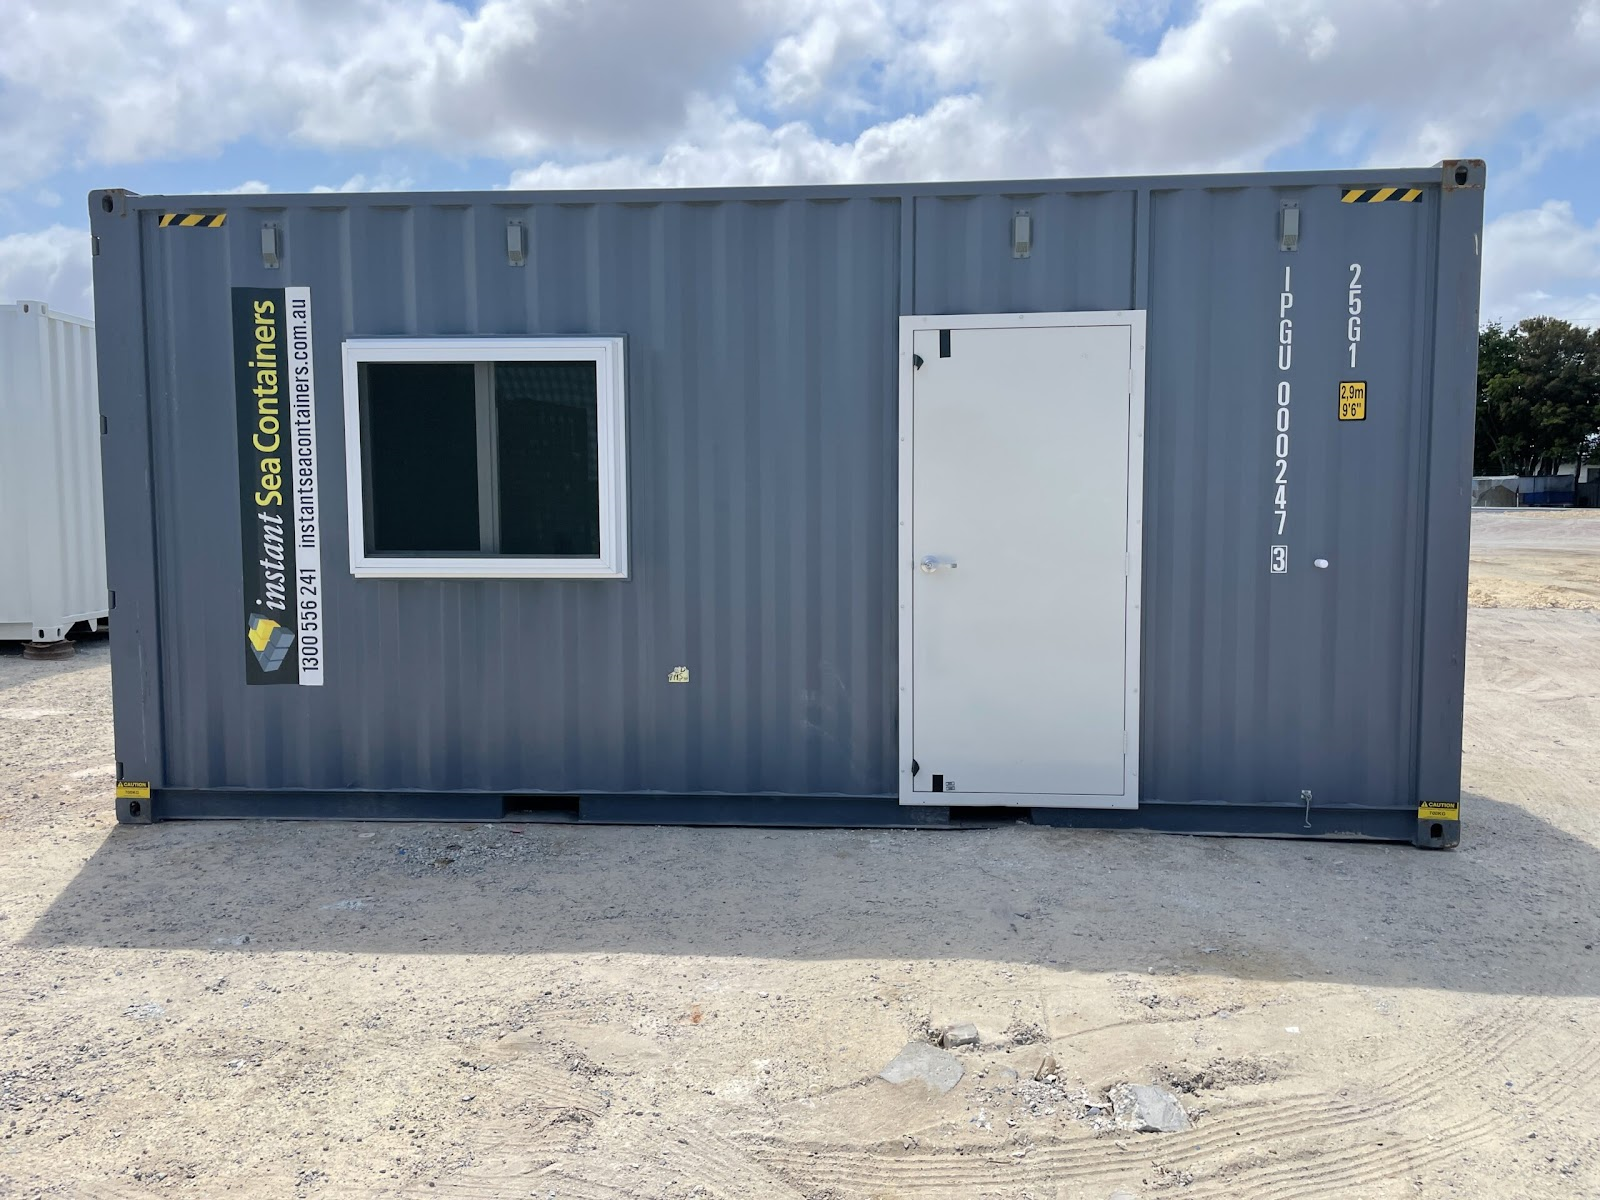 Gray shipping container modified with a white door and window, located in a storage yard.